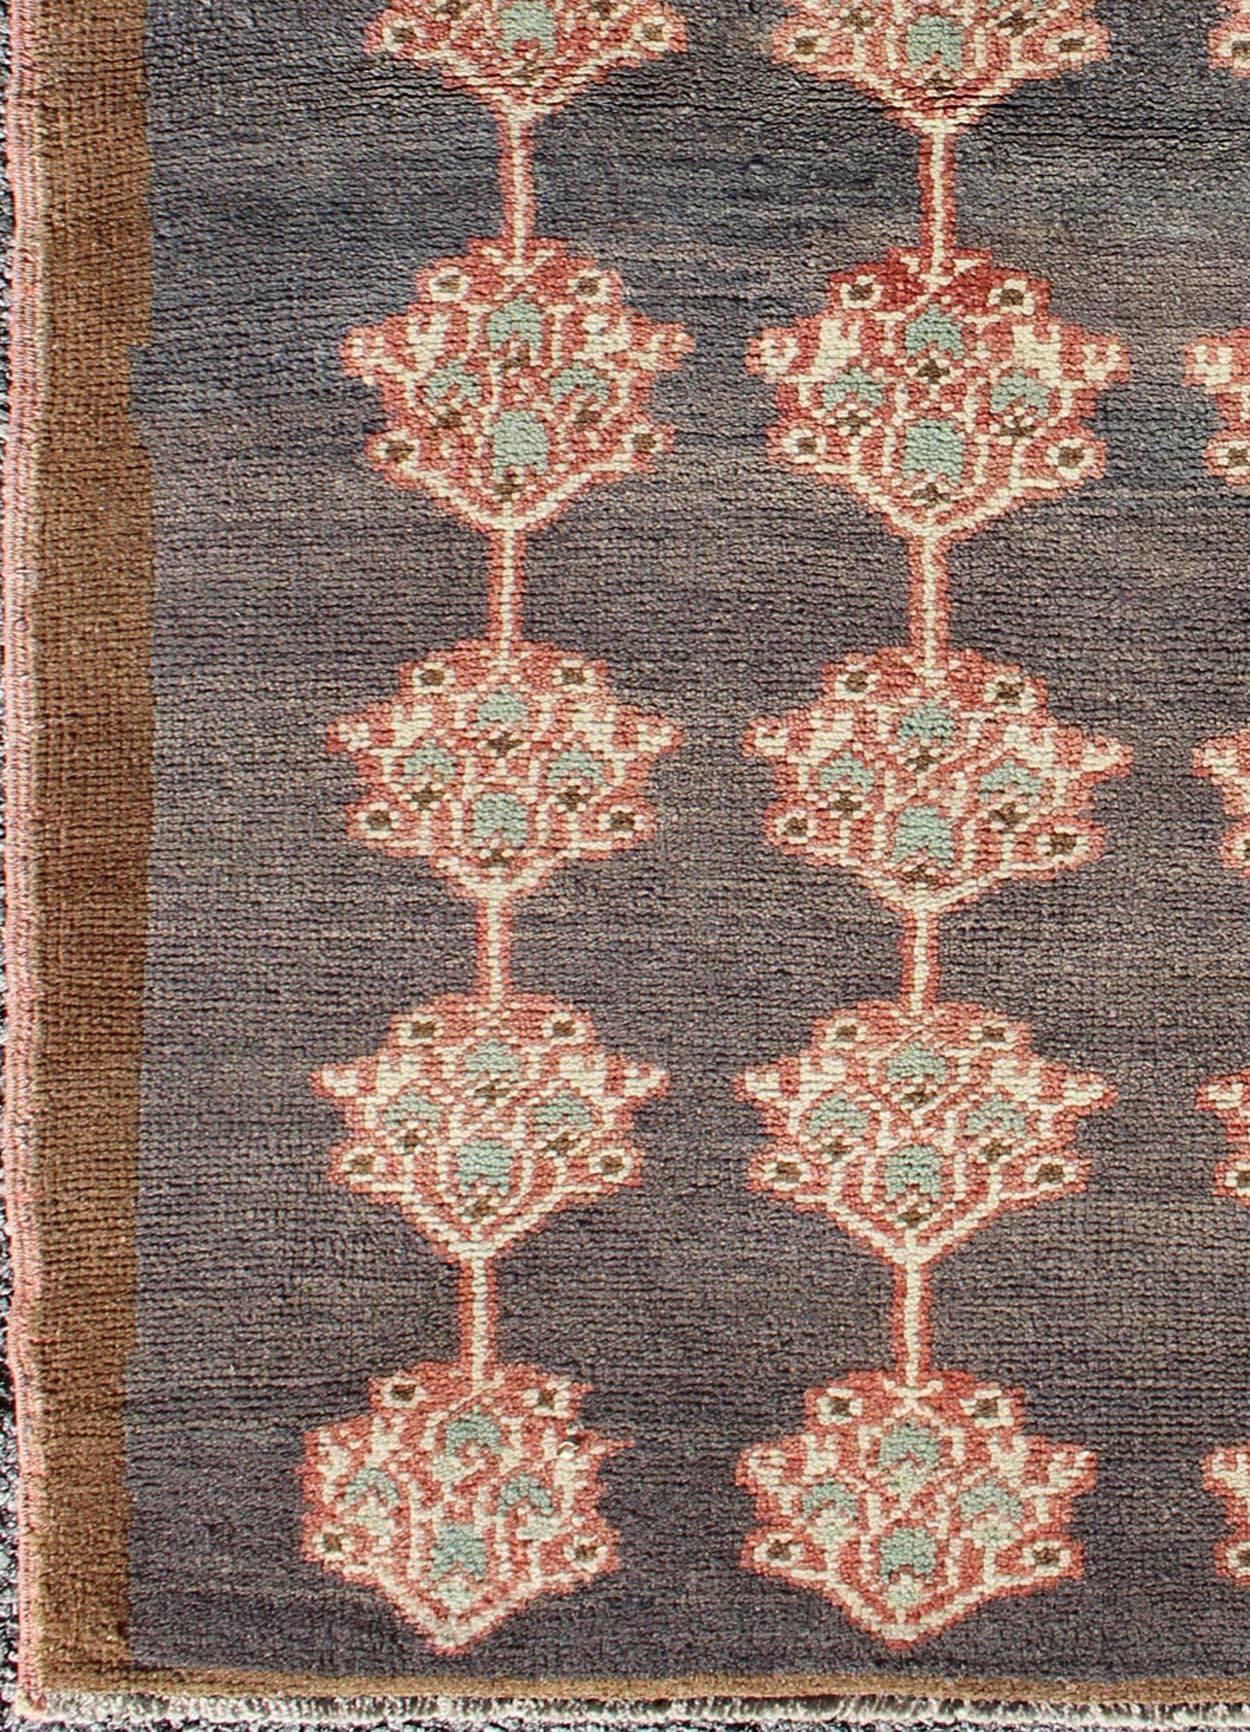 Turkish Tulu with three rows of Floral Medallions, rug EN-142681, country of origin / type: Turkey / Tulu, circa mid-20th Century.

This Tulu carpet features three rows of medallions laid across a charcoaled -colored field and enclosed within a